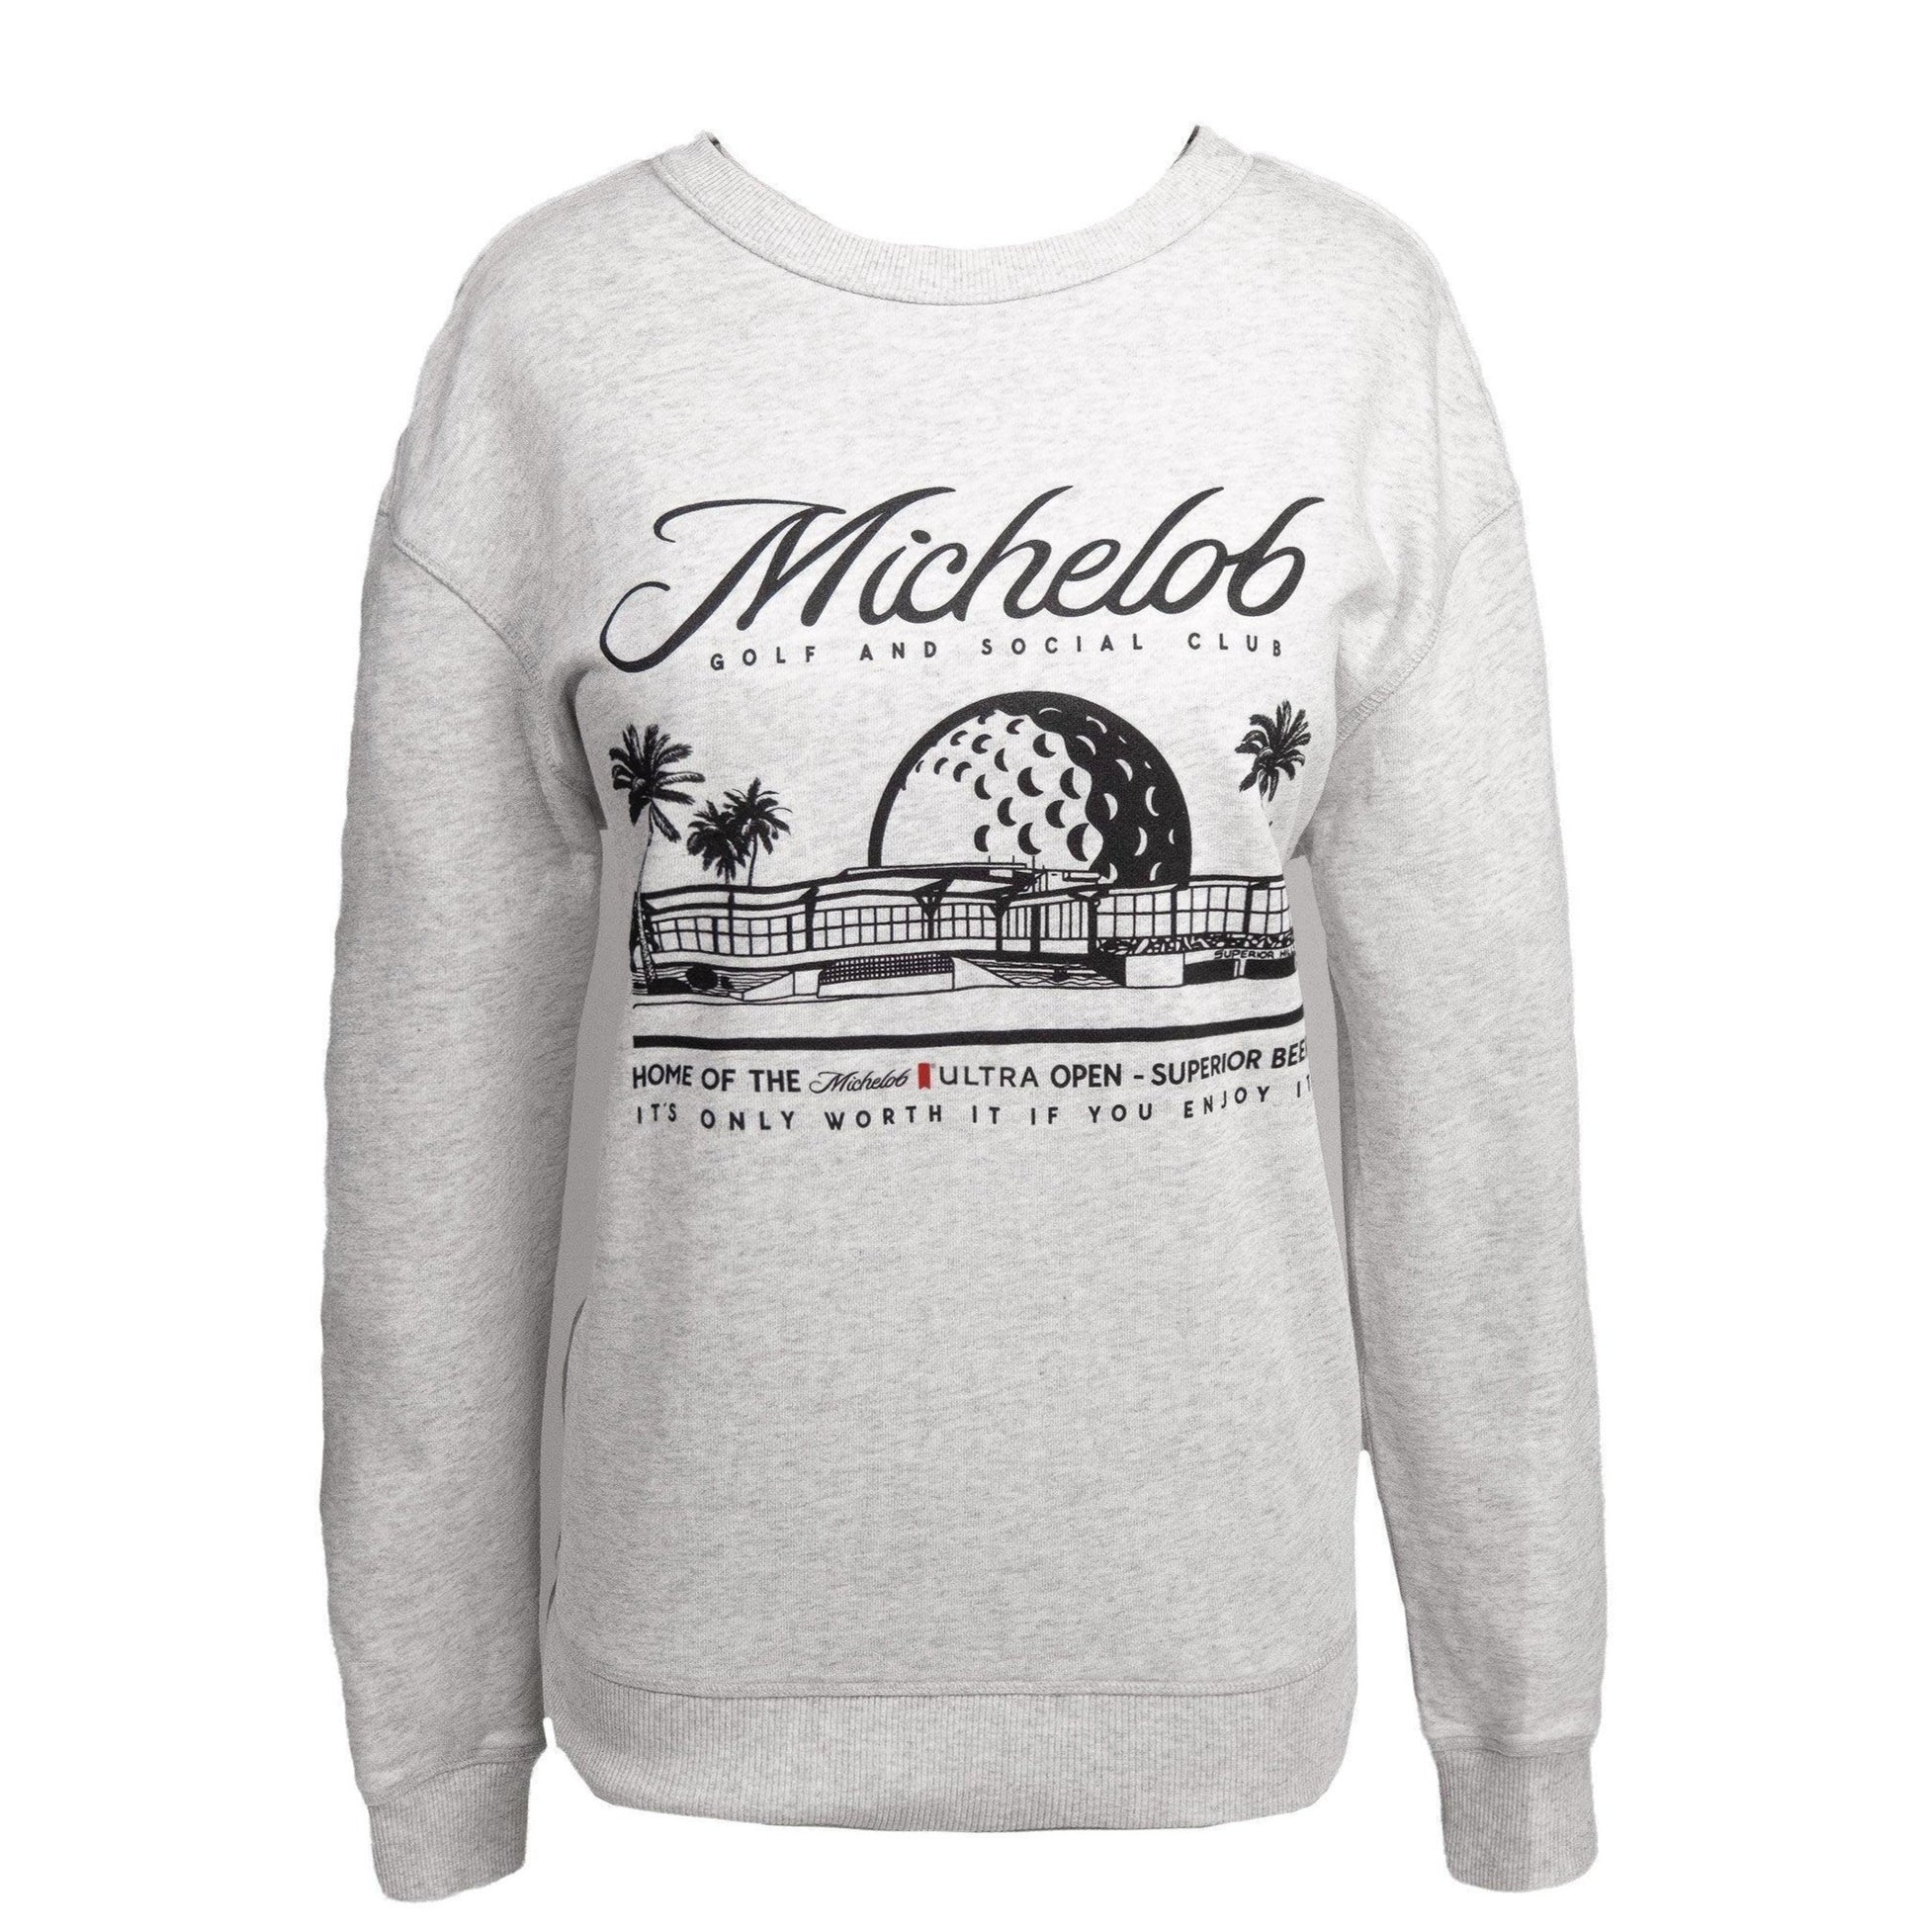 Front view of heathered grey Michelob Golf and Social Club crewneck